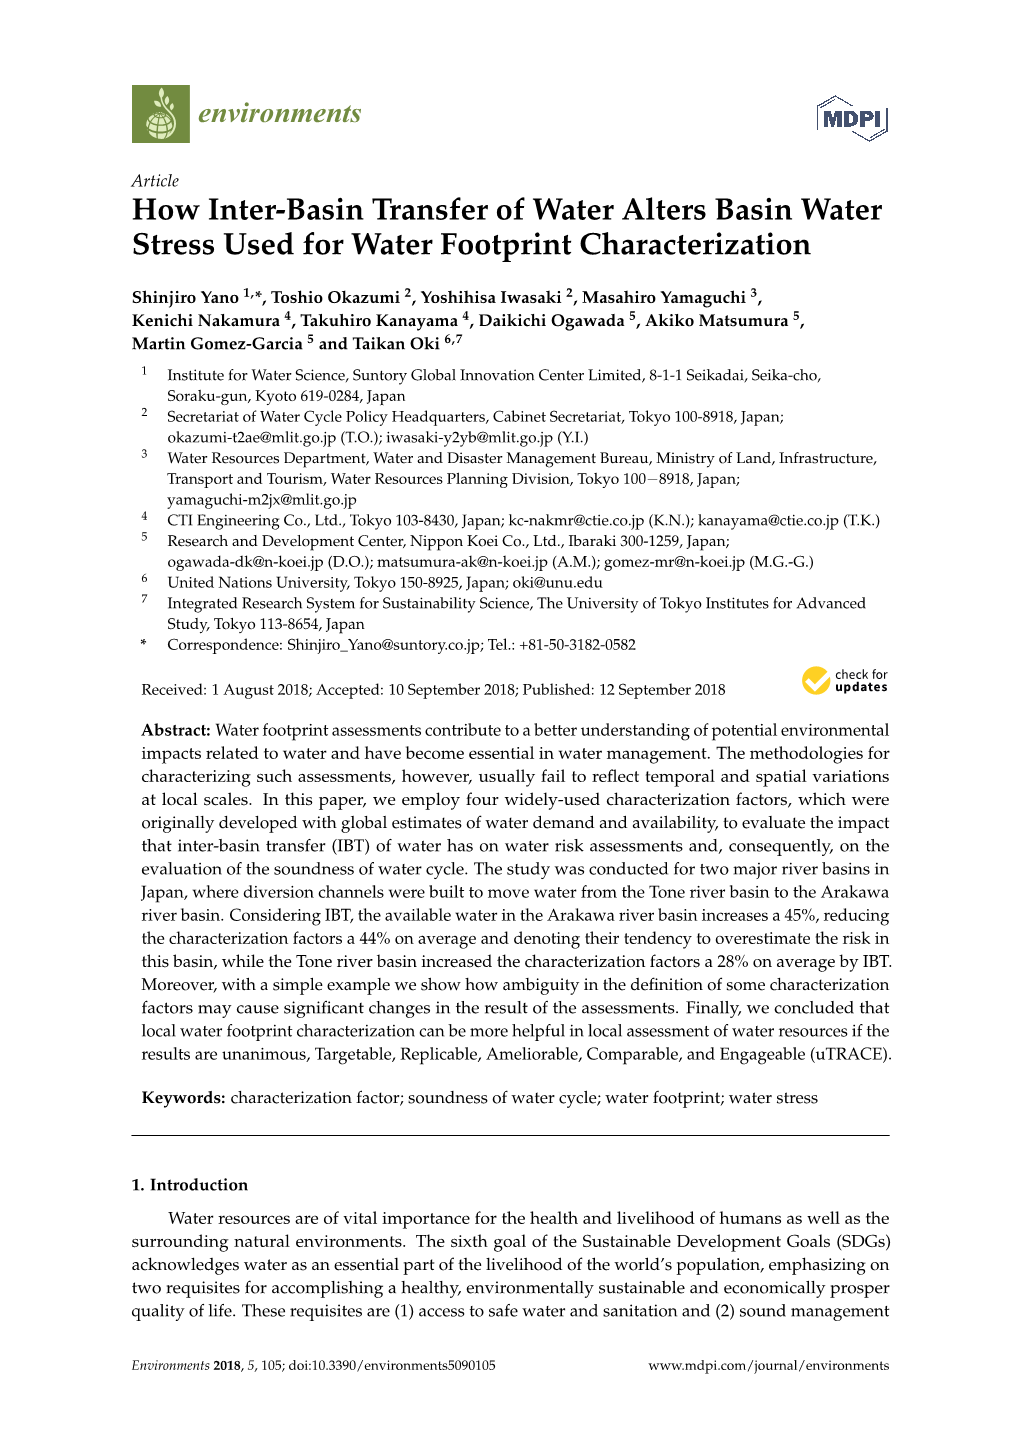 How Inter-Basin Transfer of Water Alters Basin Water Stress Used for Water Footprint Characterization